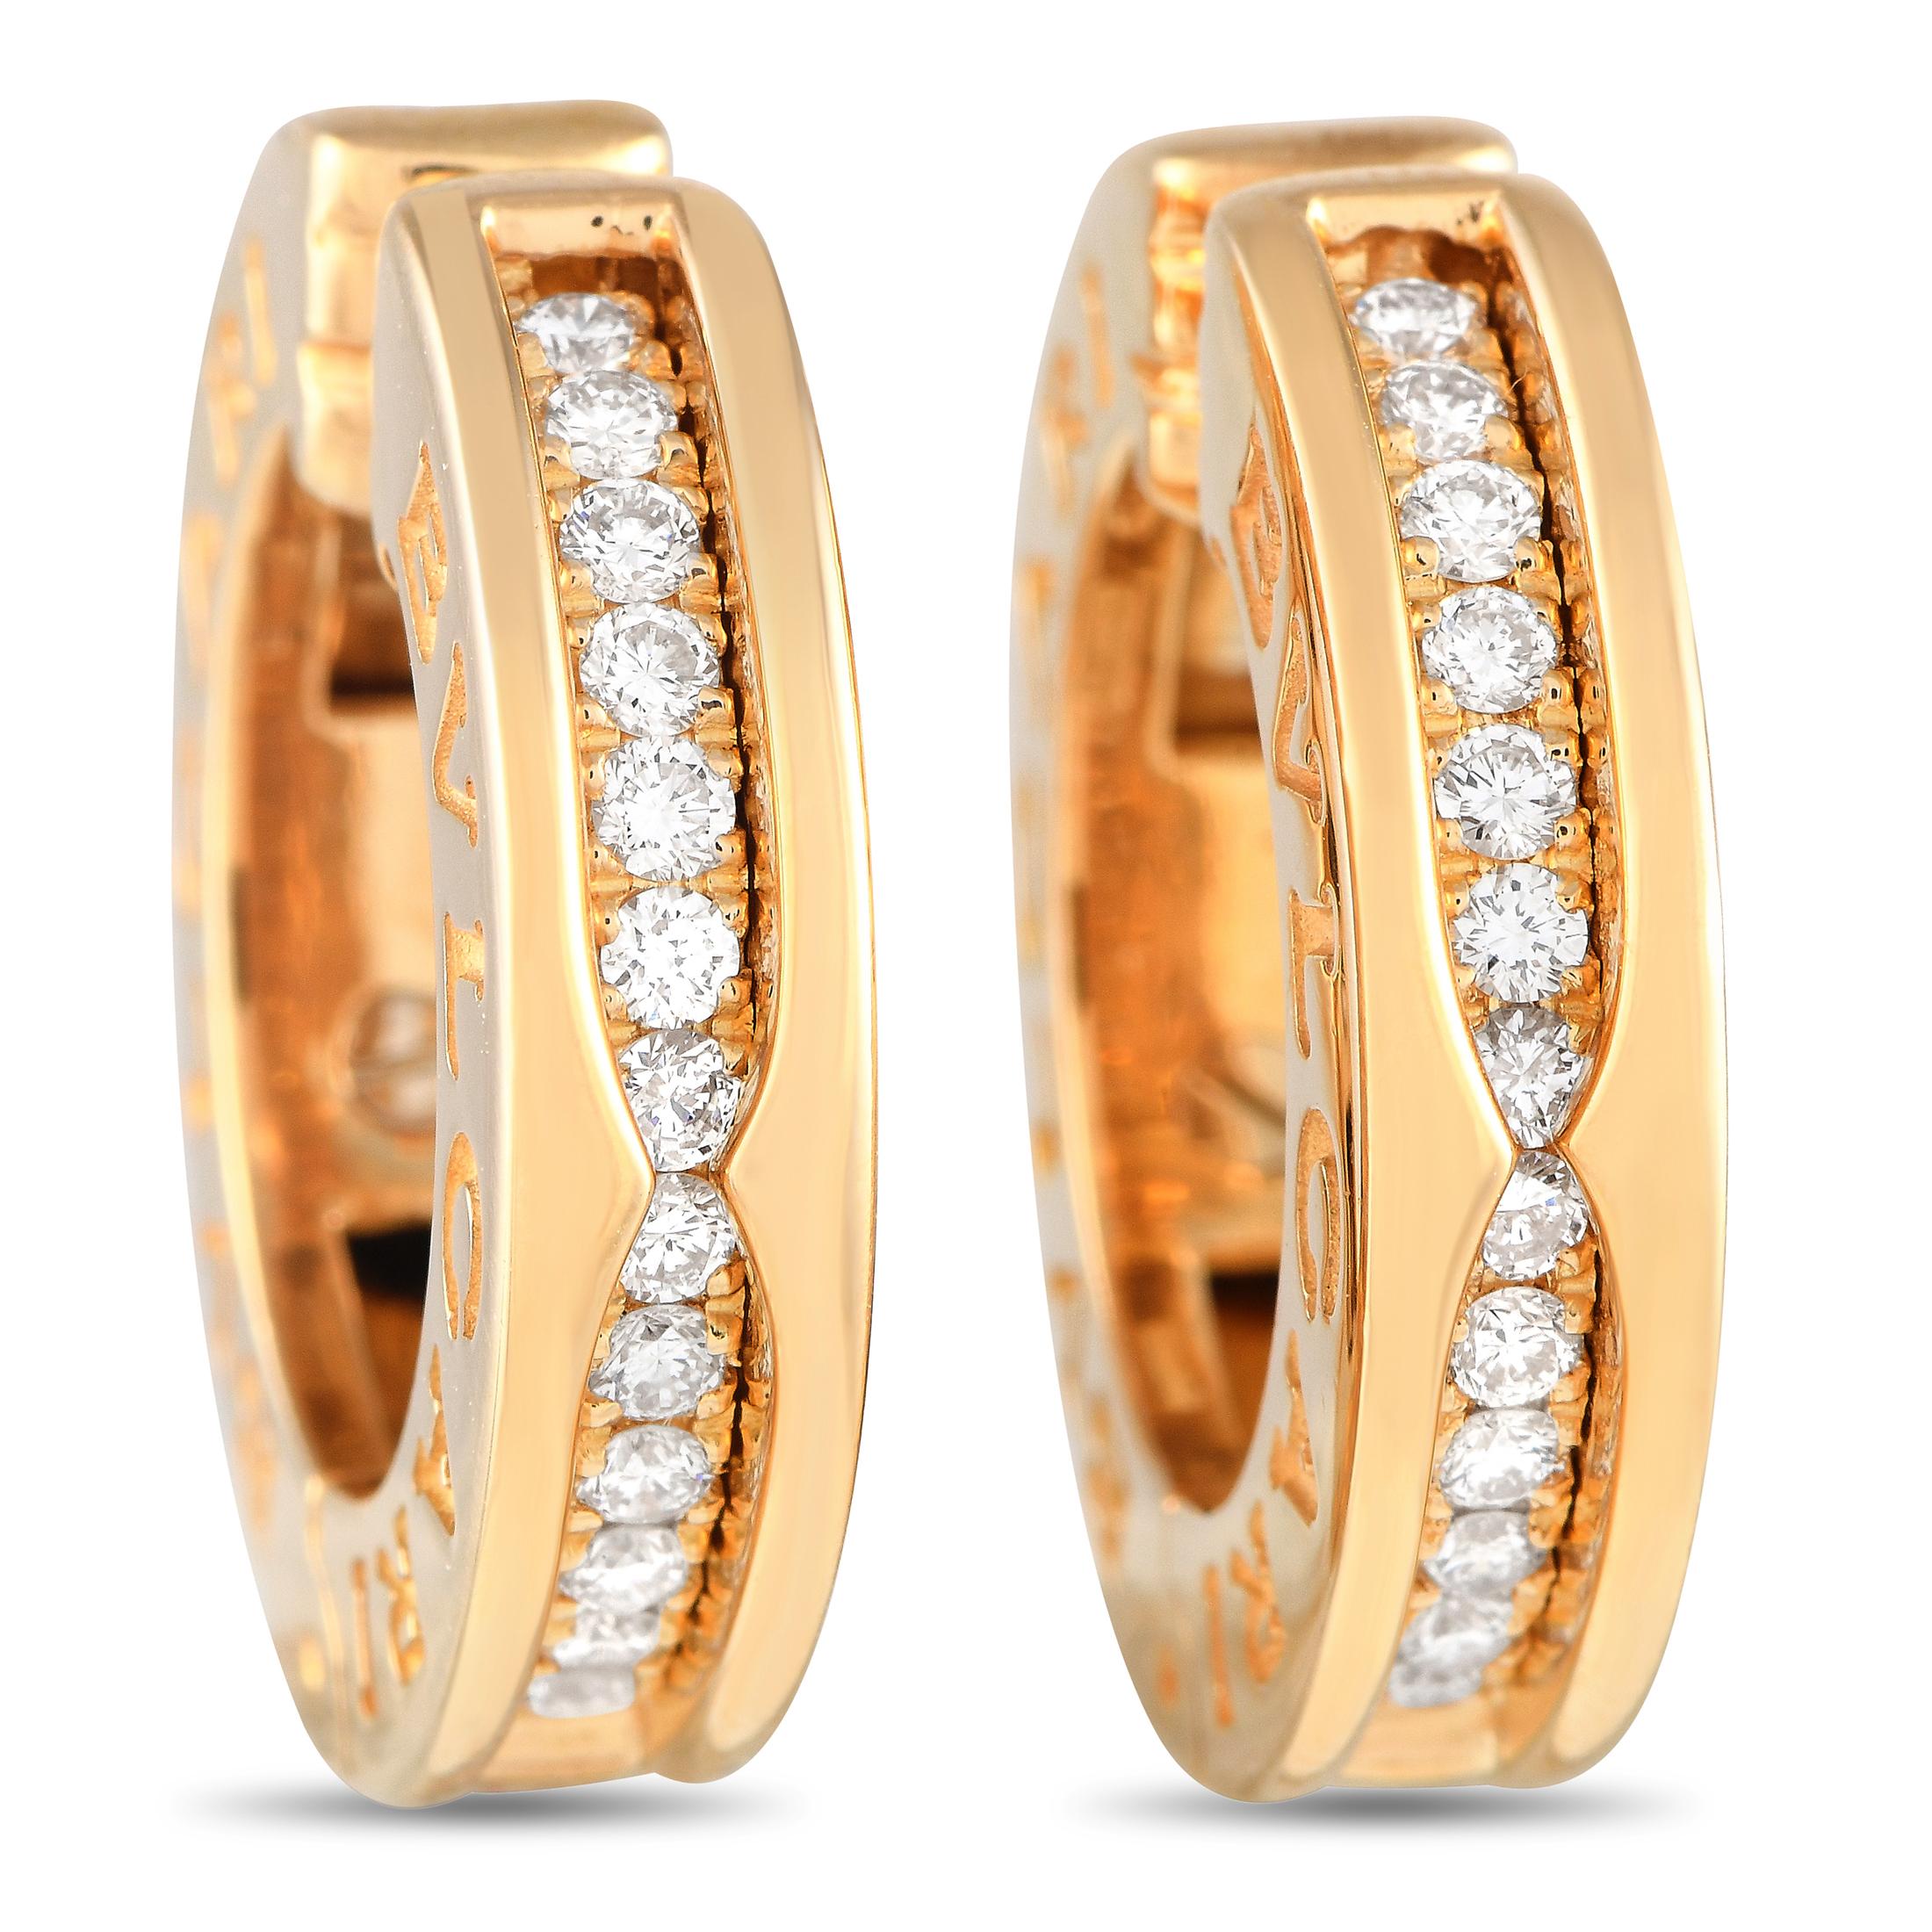 Bvlgari B.zero1 18K Yellow Gold 0.18ct Diamond Huggie Hoop Earrings In Excellent Condition For Sale In Southampton, PA